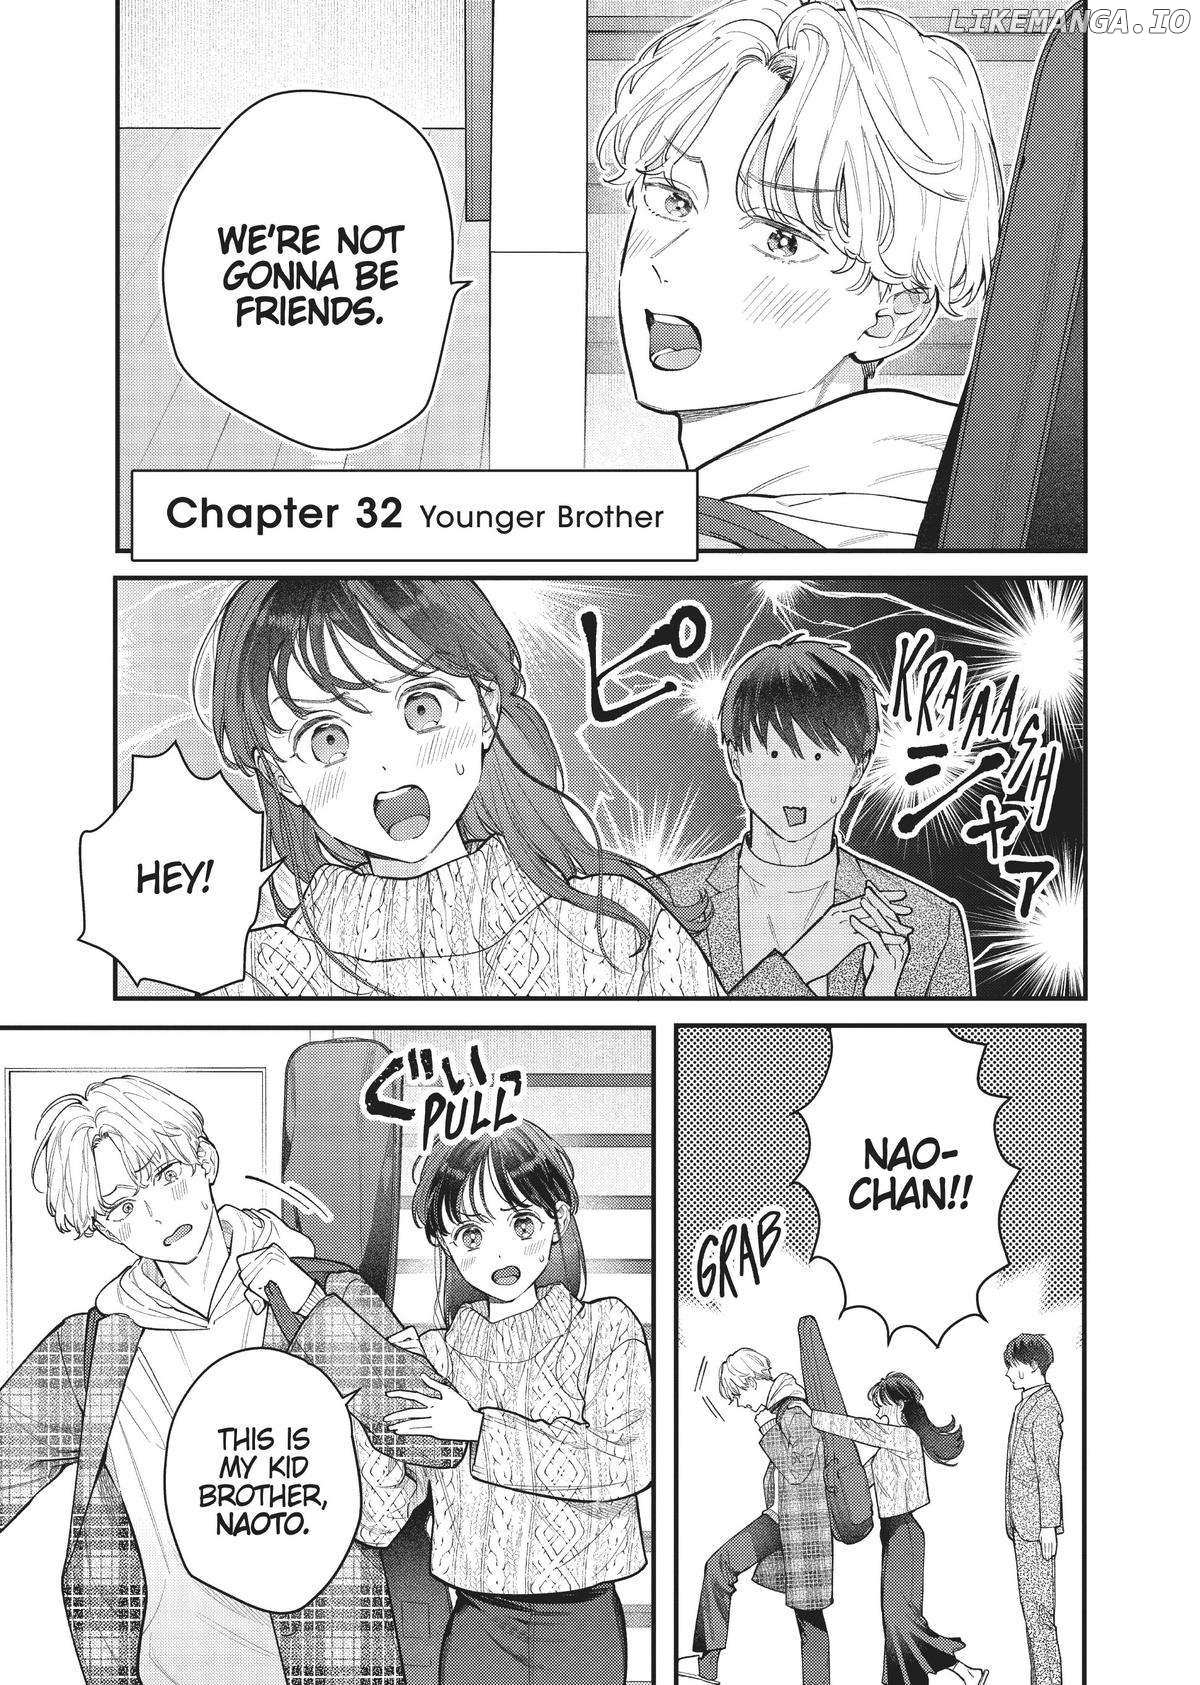 Is It Wrong To Get Done By A Girl? - Page 2